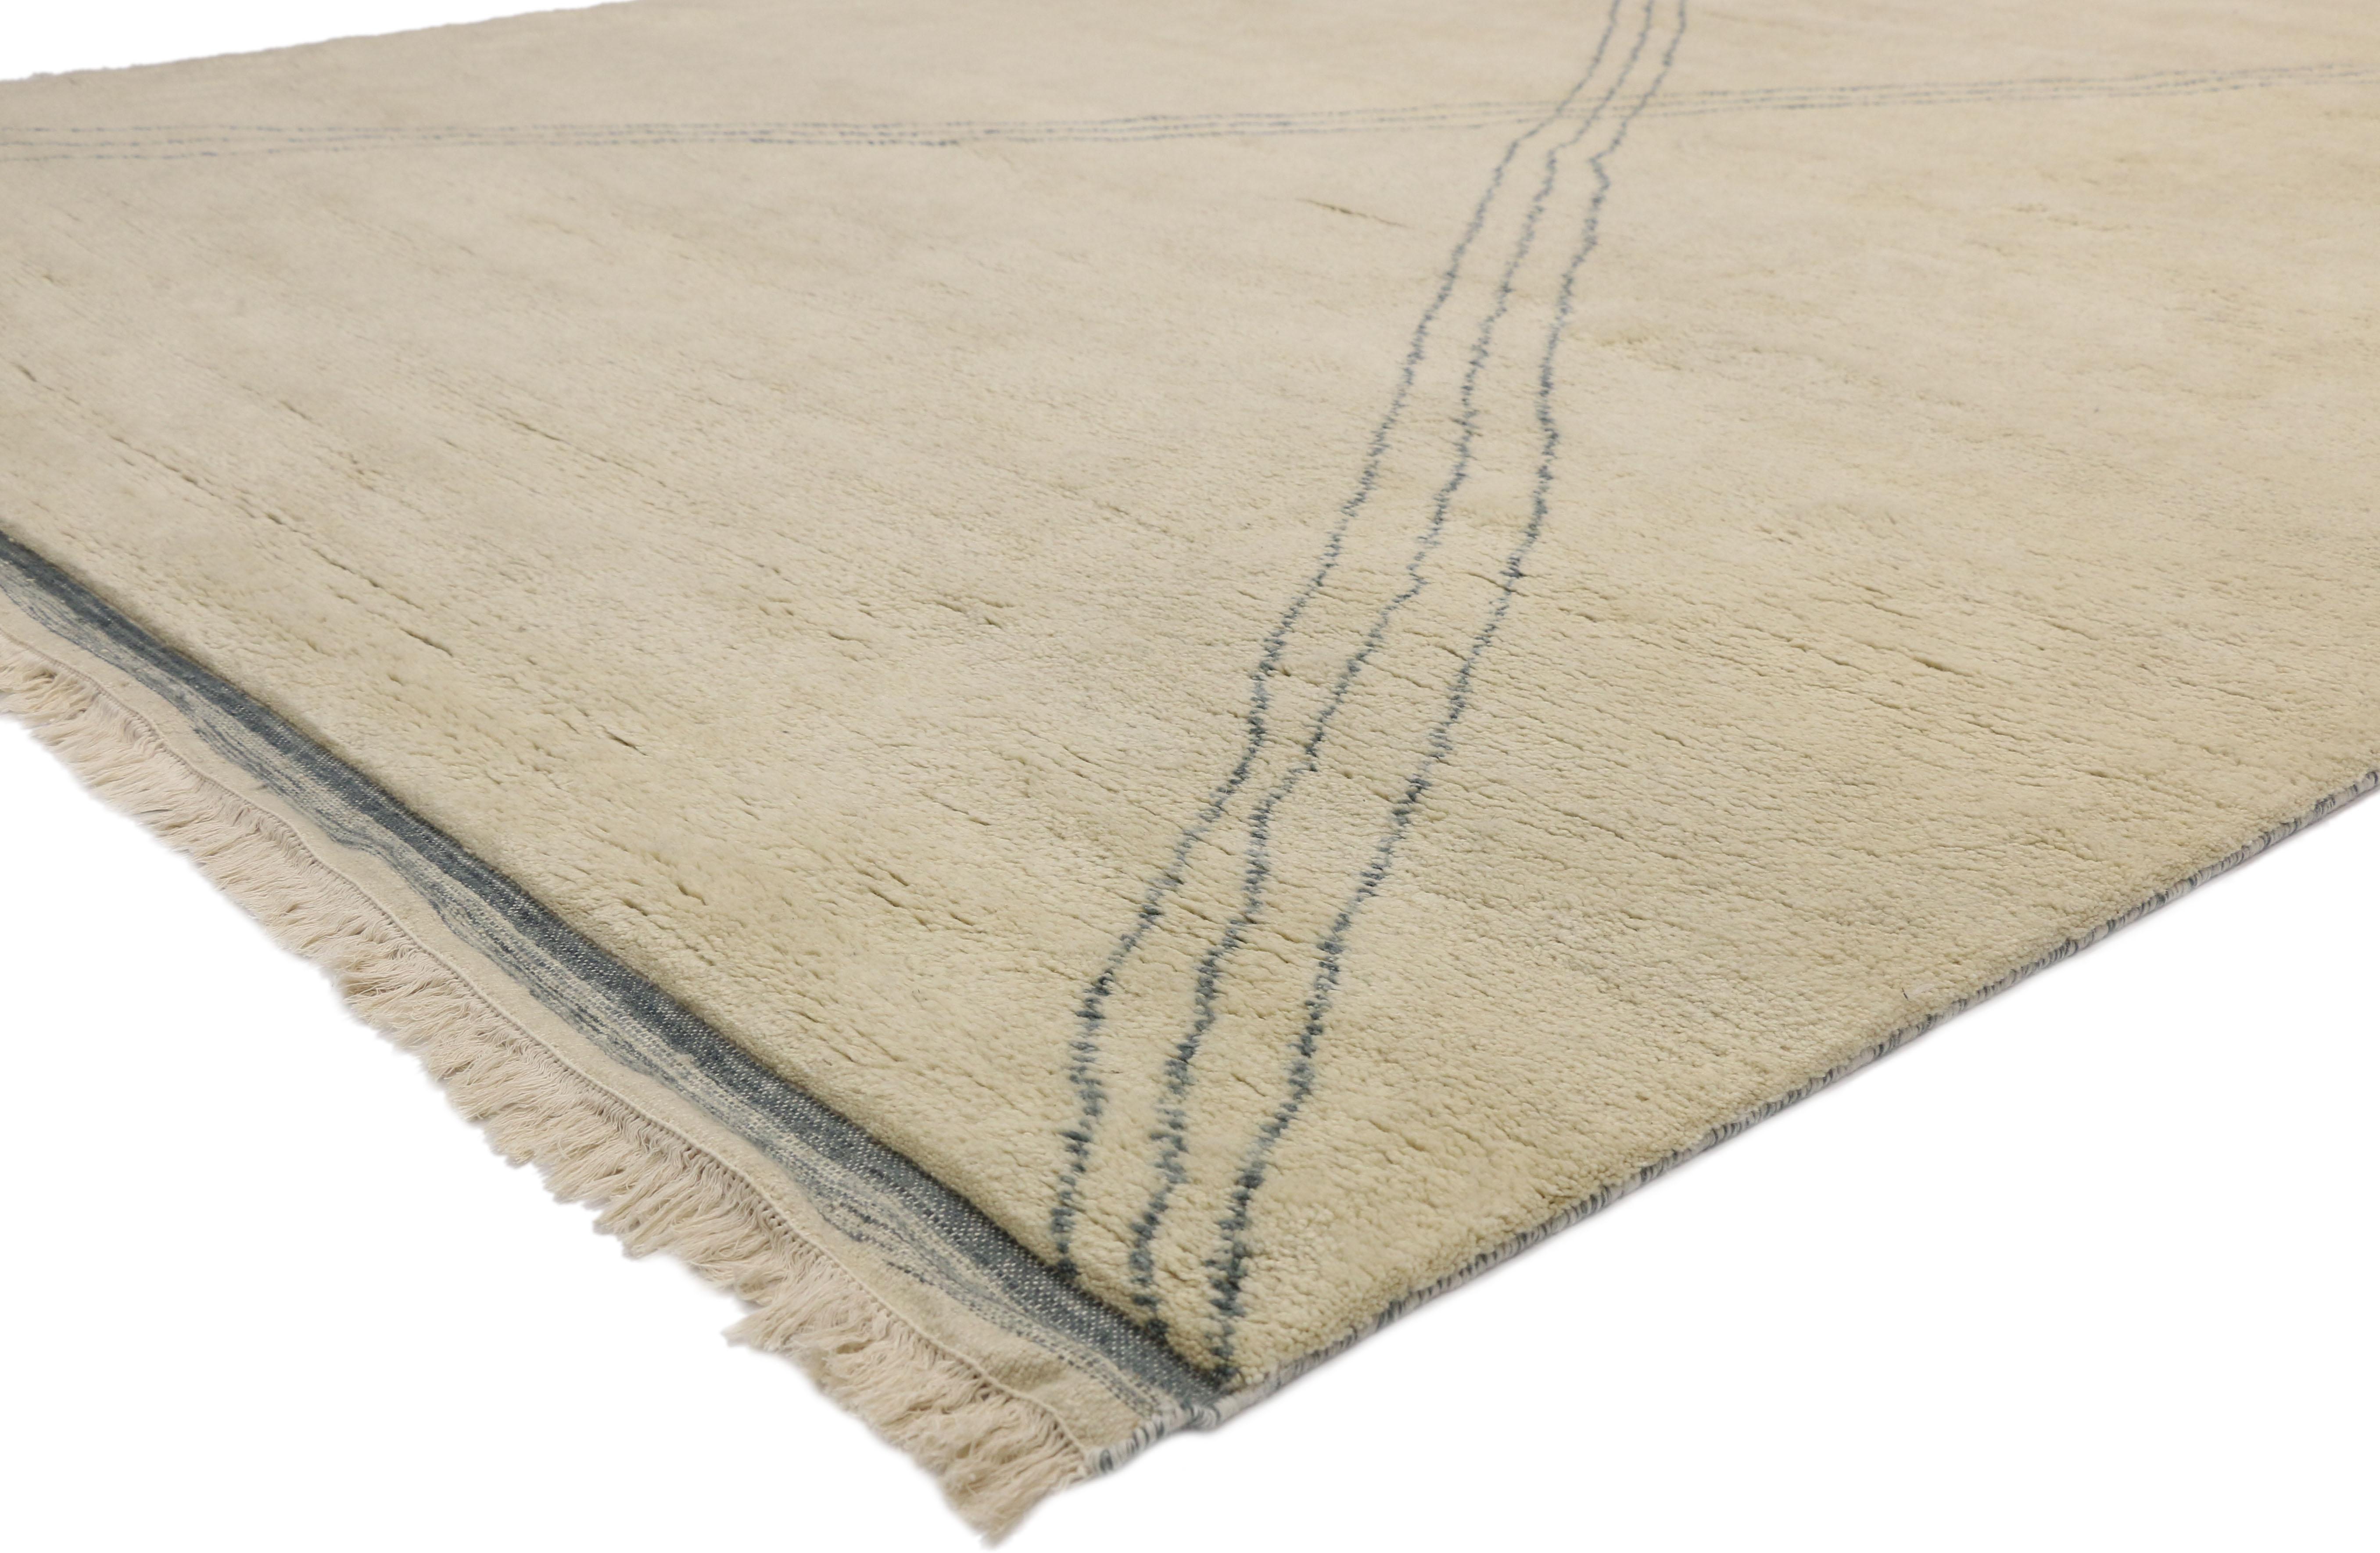 30500, new contemporary Moroccan area rug with modernist style and Hygge vibes. This hand knotted wool contemporary Moroccan area rug features a large X-shape composed from three thin gray lines on a creamy-beige backdrop. Beautiful detail and